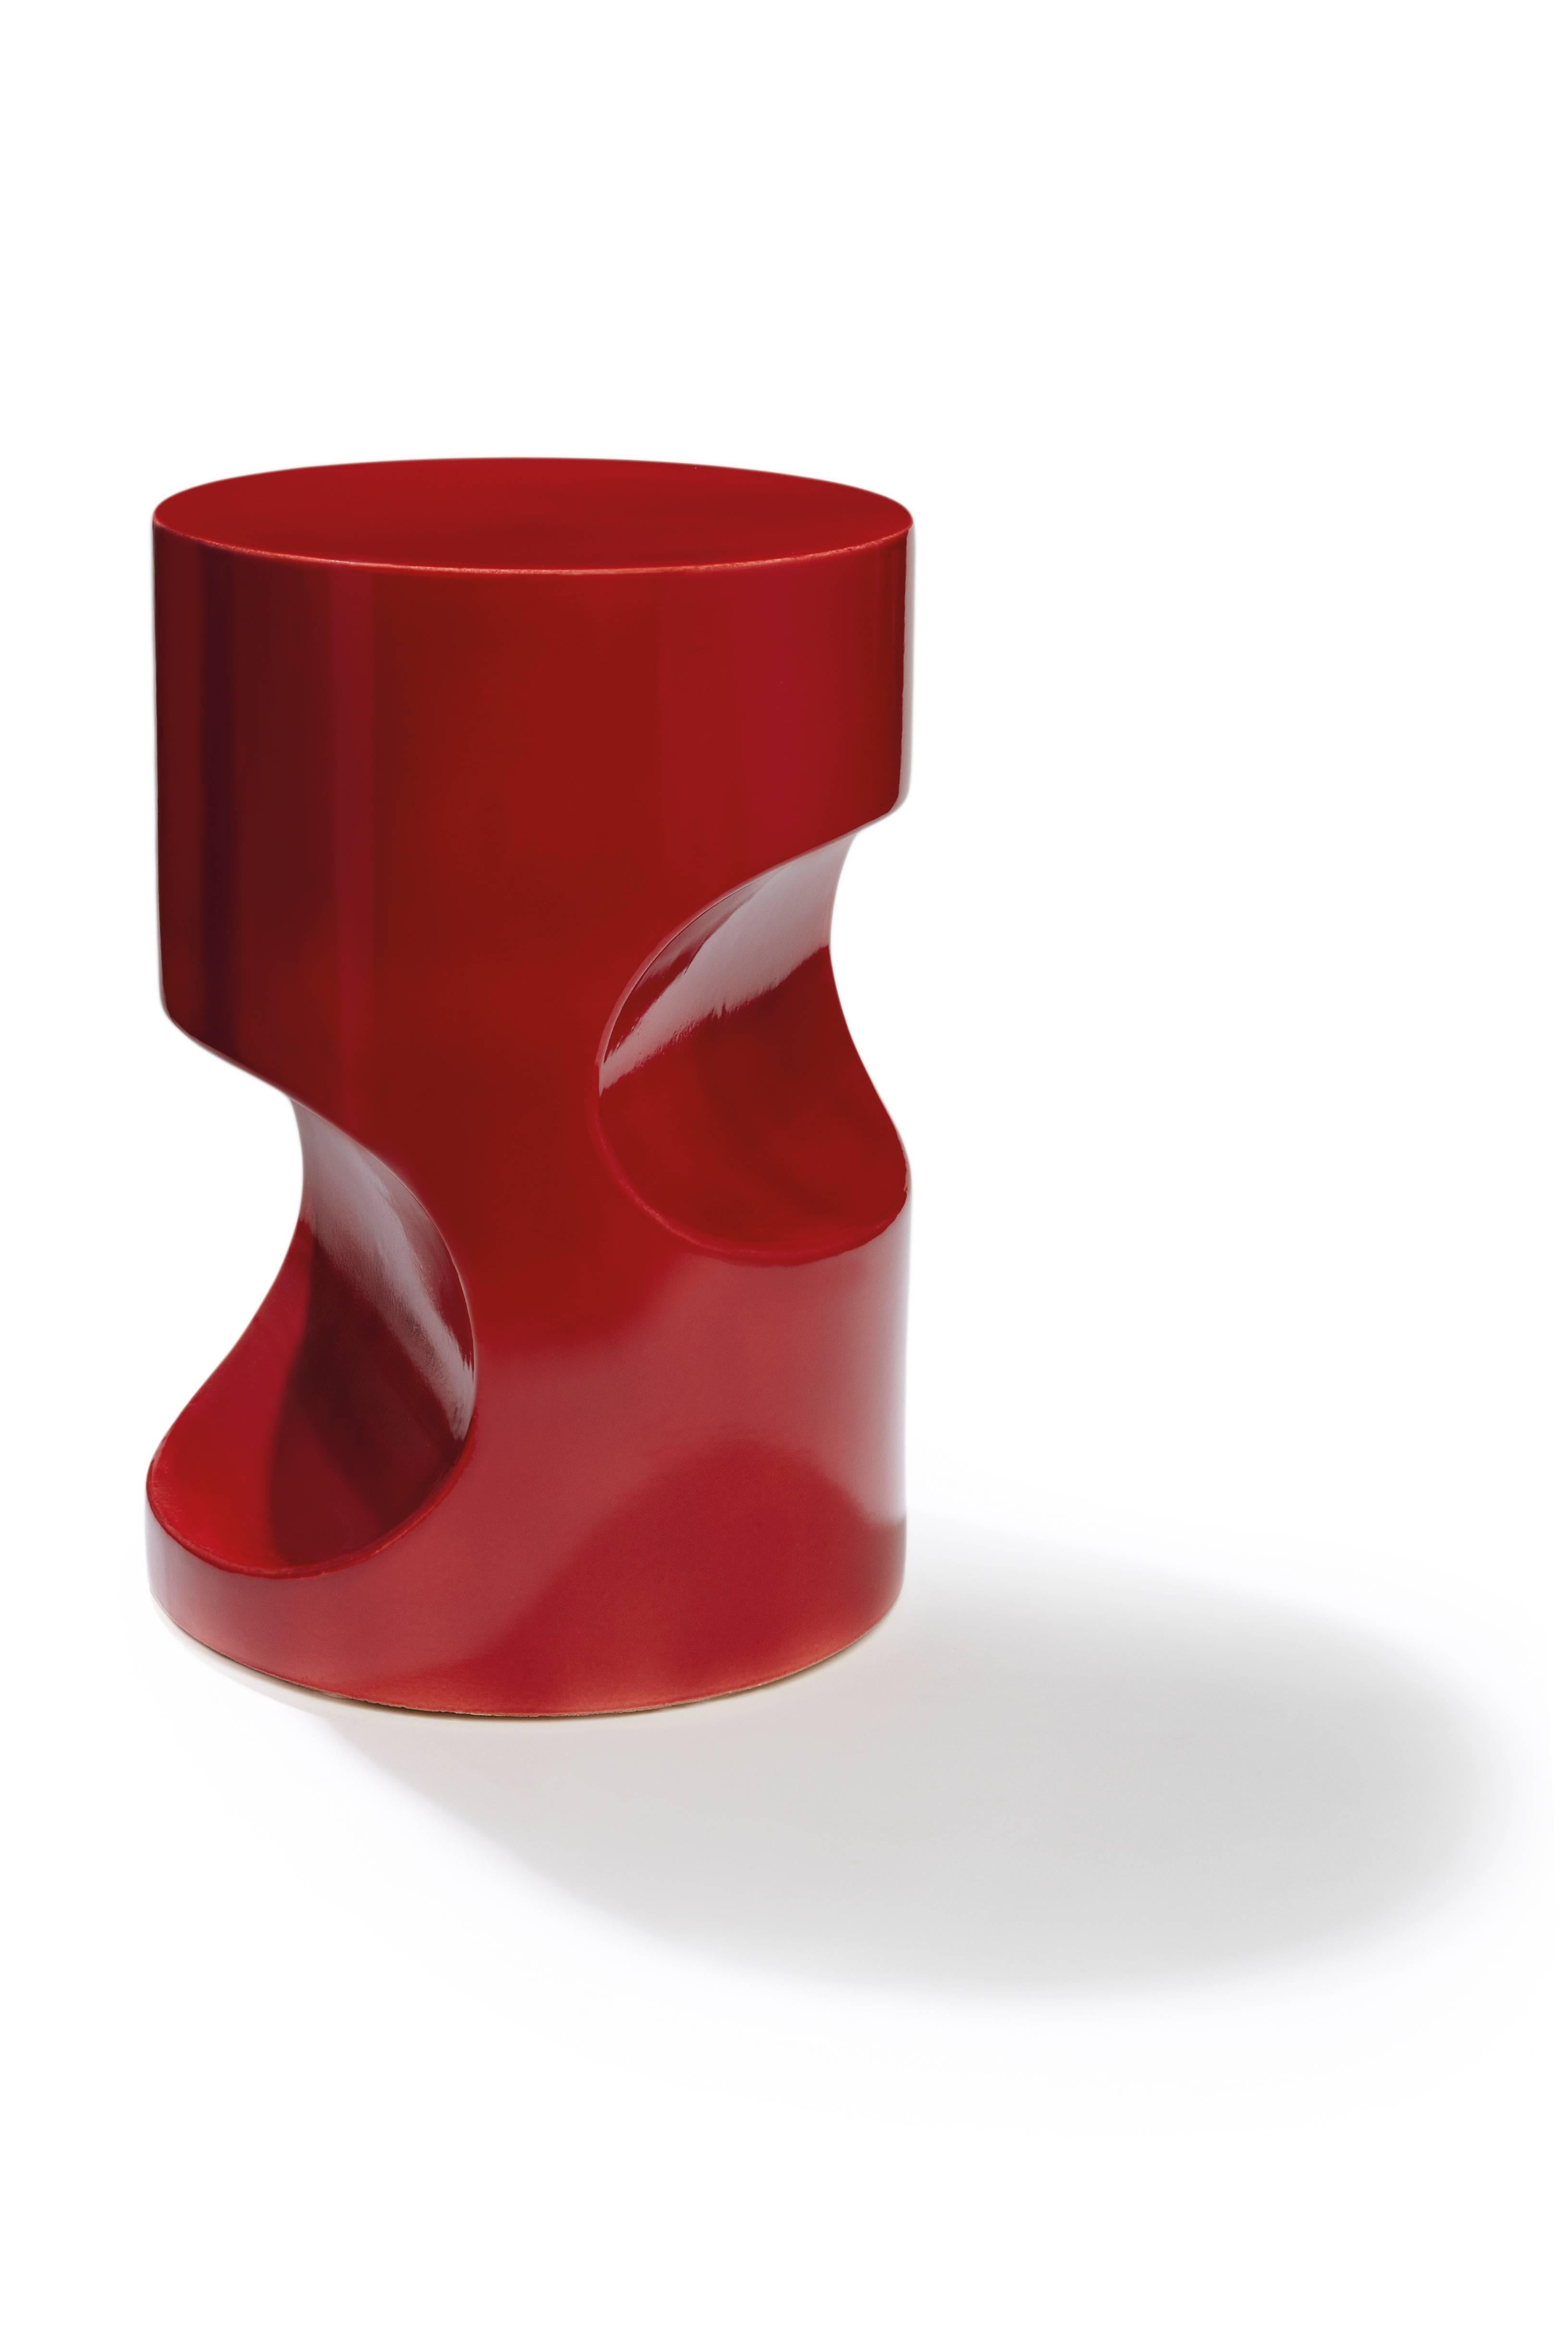 Fétiche ceramic stool designed by Hervé Langlais for Galerie Negropontes. Available in different colors. 

French designer Herve Langlais created a series of stools/pouf named after his Fetiche table lamp. Fetiche pouf are in ceramic with different